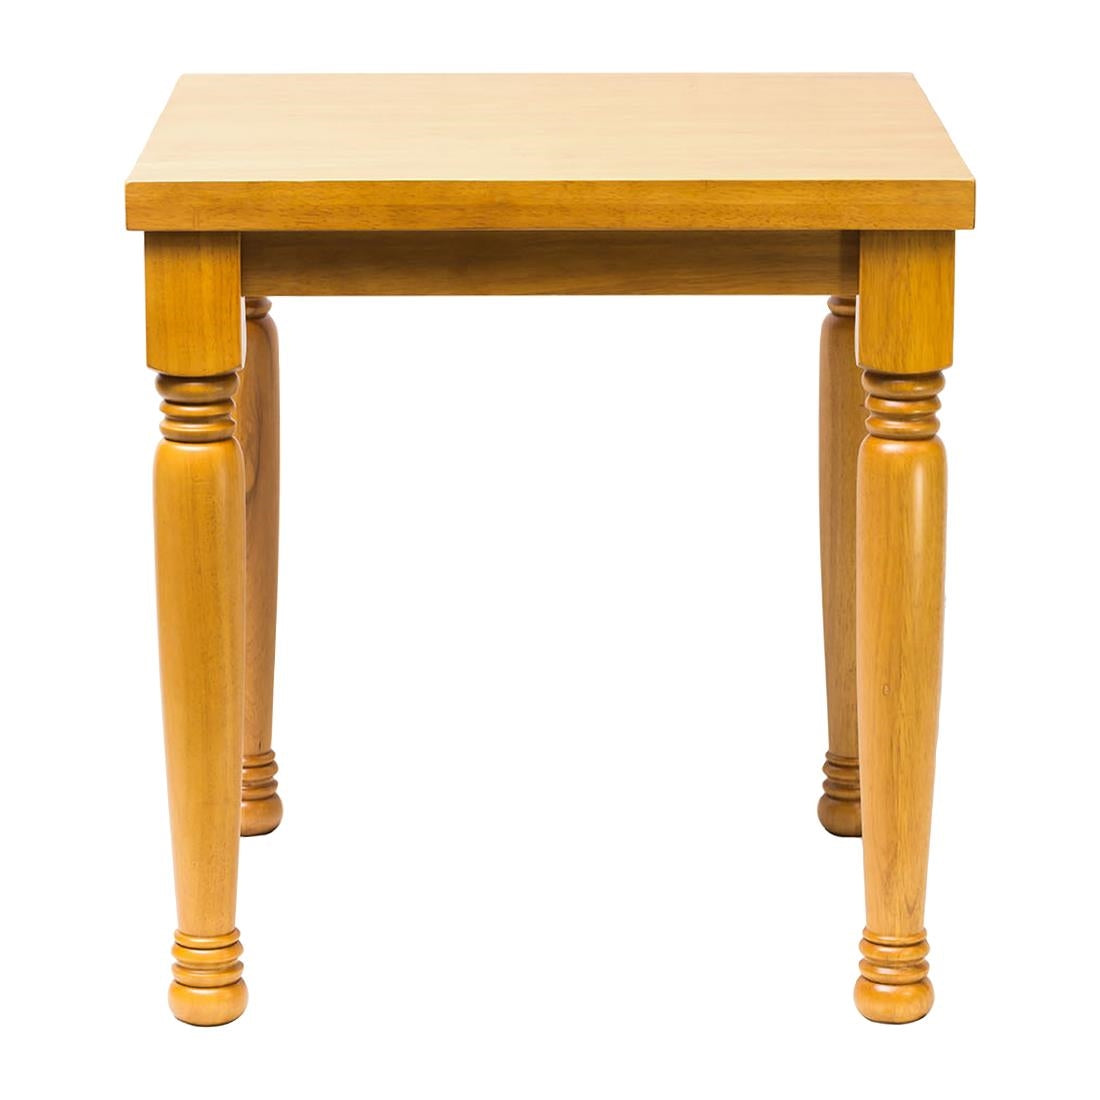 FT492 Cotswold Soft Oak Square Dining Table 700x700mm JD Catering Equipment Solutions Ltd